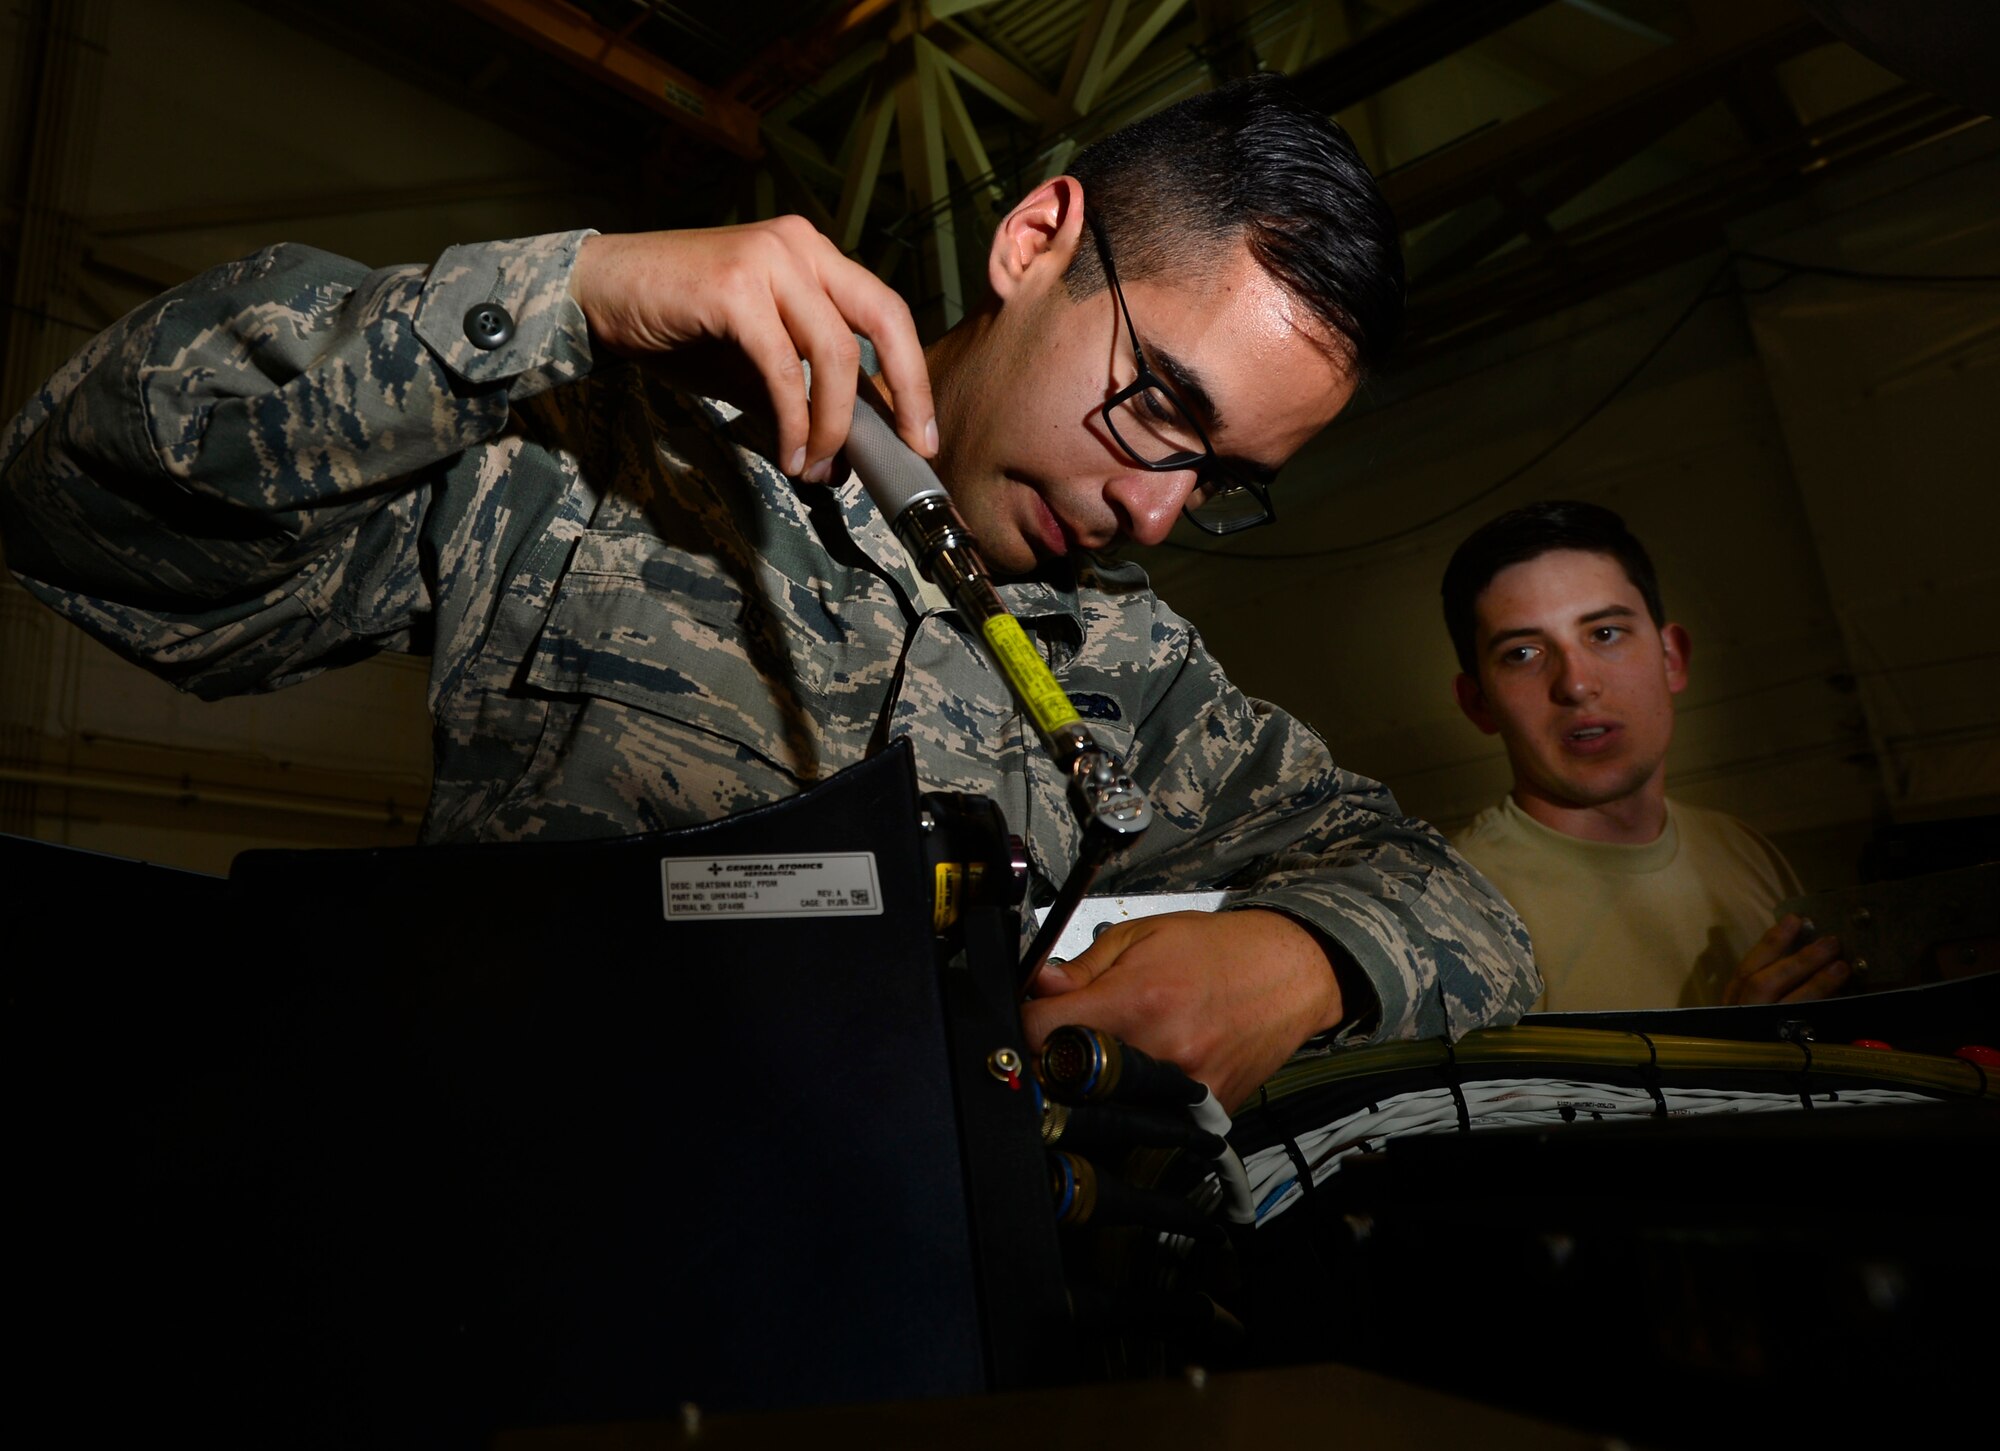 Airman Troy, left, and Staff Sgt. Marshall, both 432nd Aircraft Maintenance Squadron avionics specialists, train on removing a control box, May 11, 2016, at Creech Air Force Base, Nevada. On August 31, 1949, Secretary of Defense Louis Johnson announced the creation of an Armed Forces Day to replace separate Army, Navy, Marine Corps and Air Force Days.  (U.S. Air Force photo by Senior Airman Christian Clausen/Released)